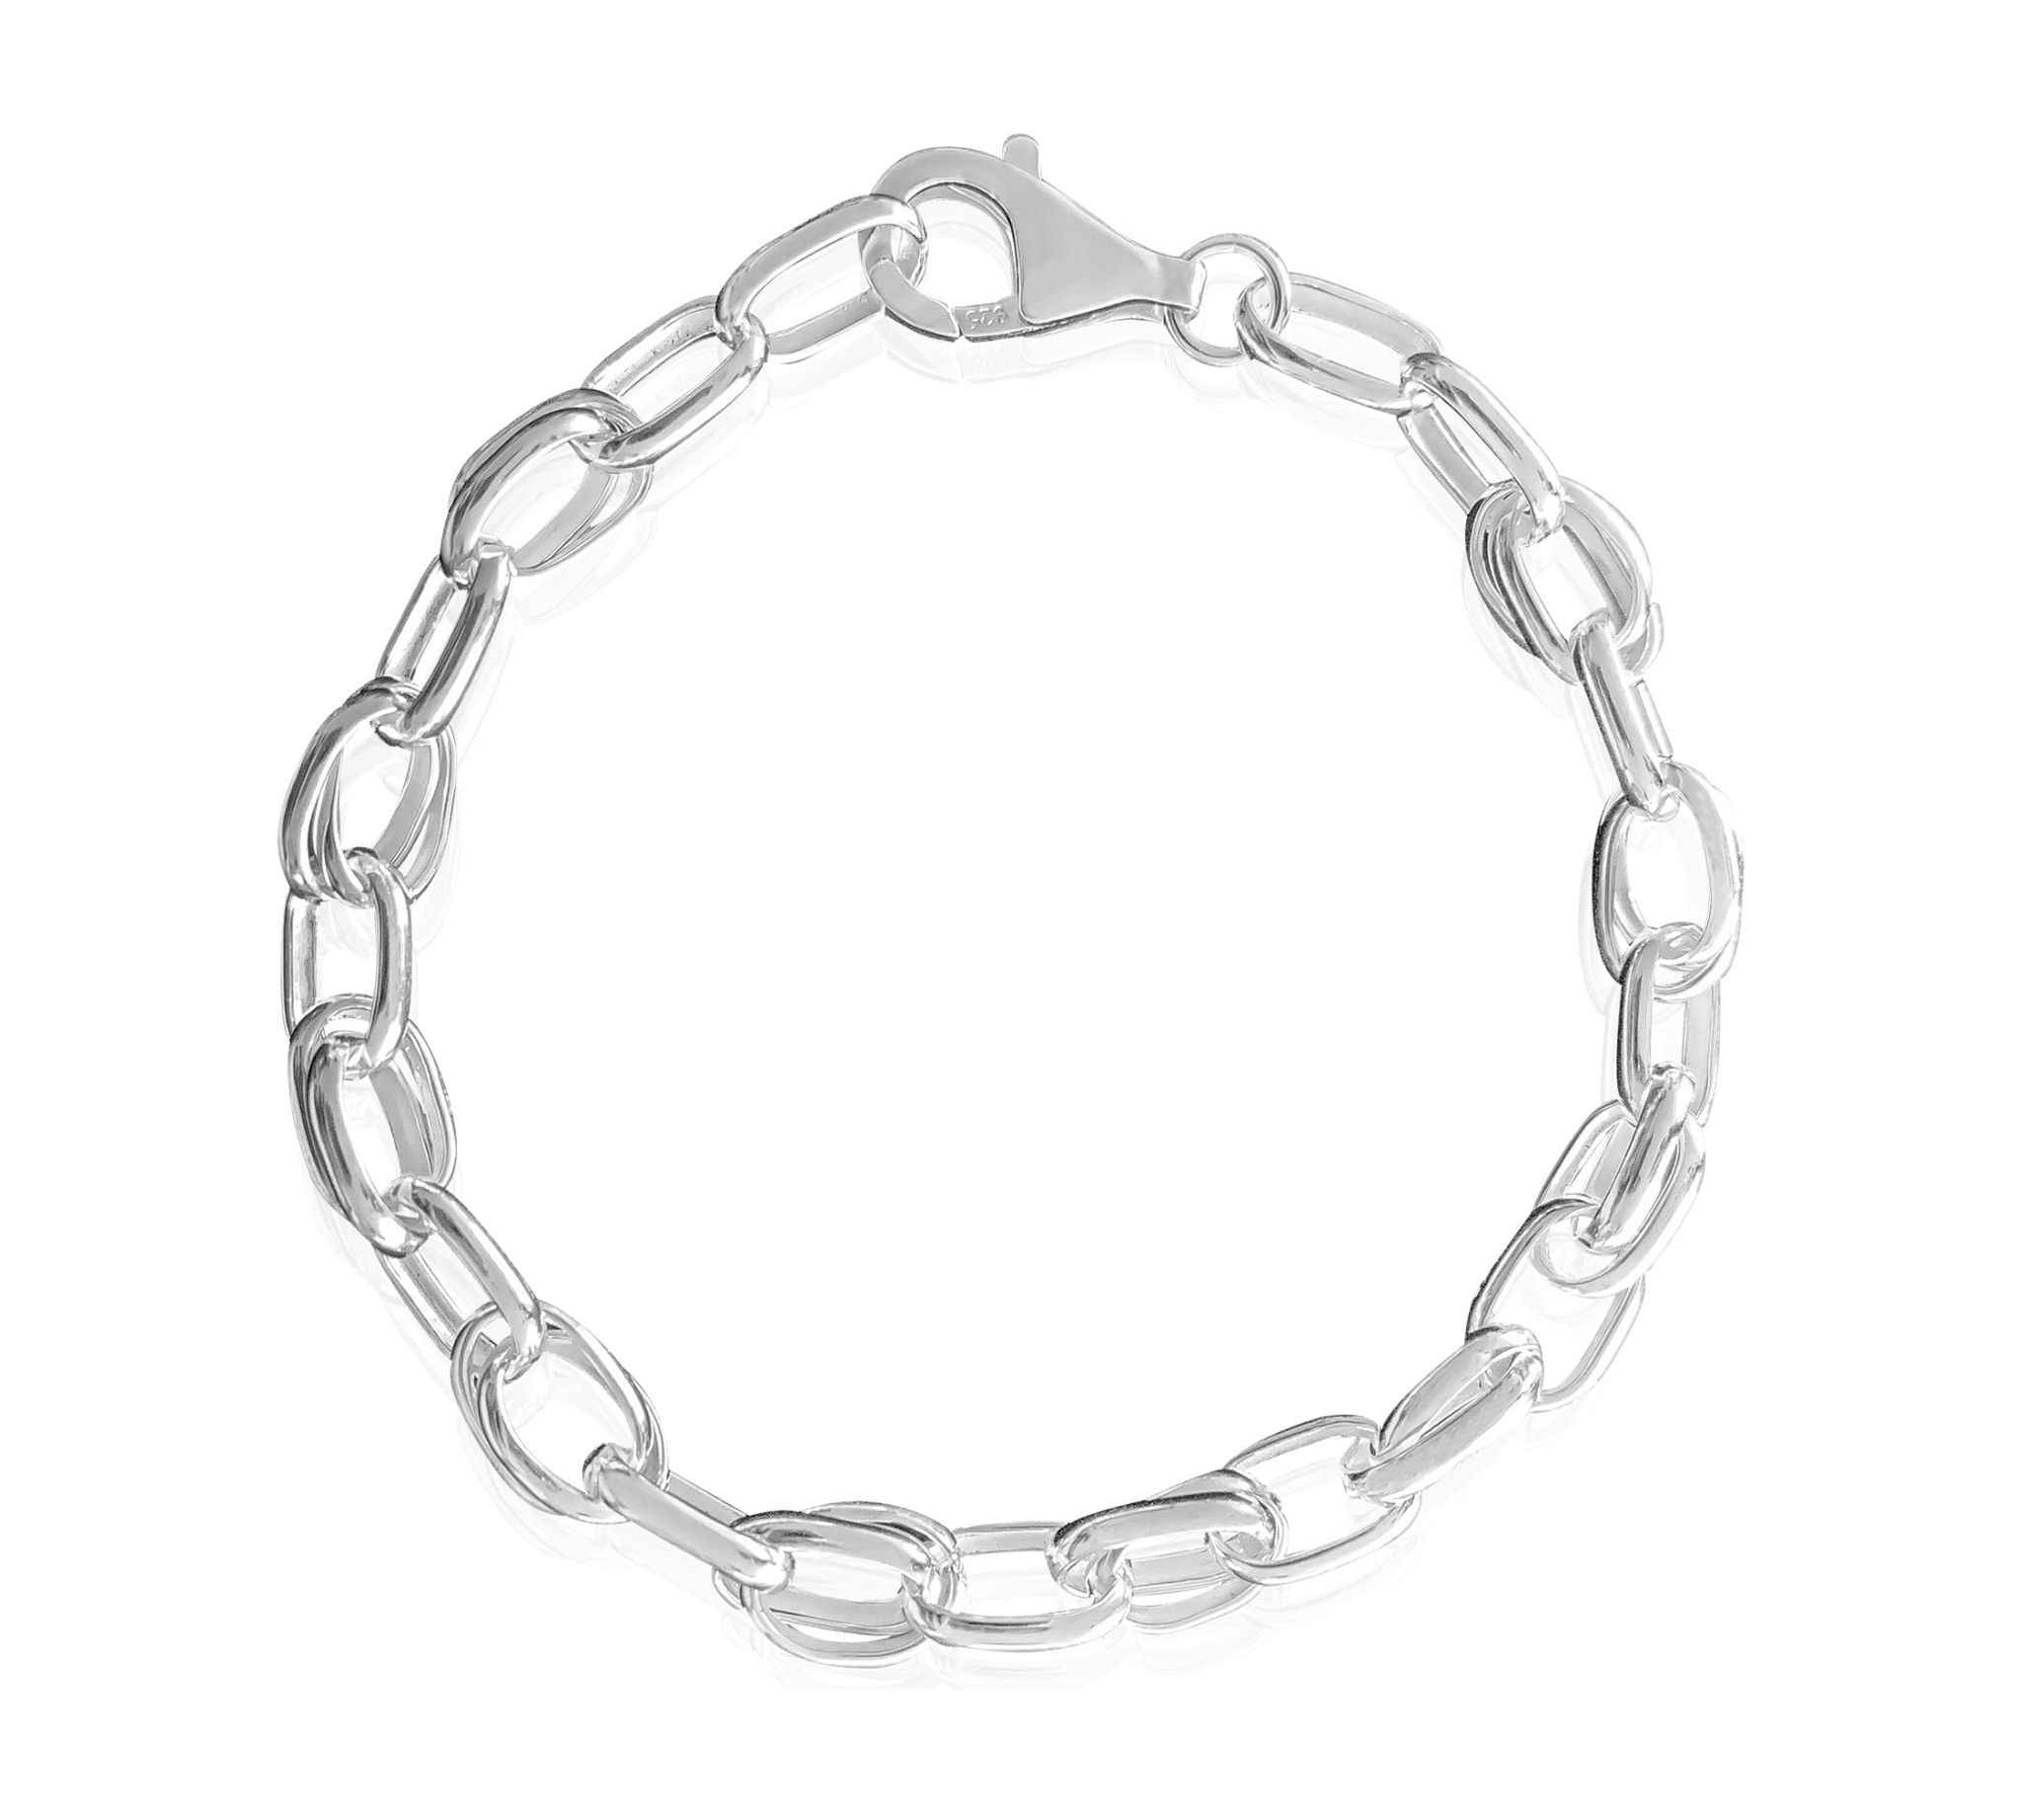 Timeless Double Link Bracelet in Sterling Silver for Women - Alessandra James Collection.